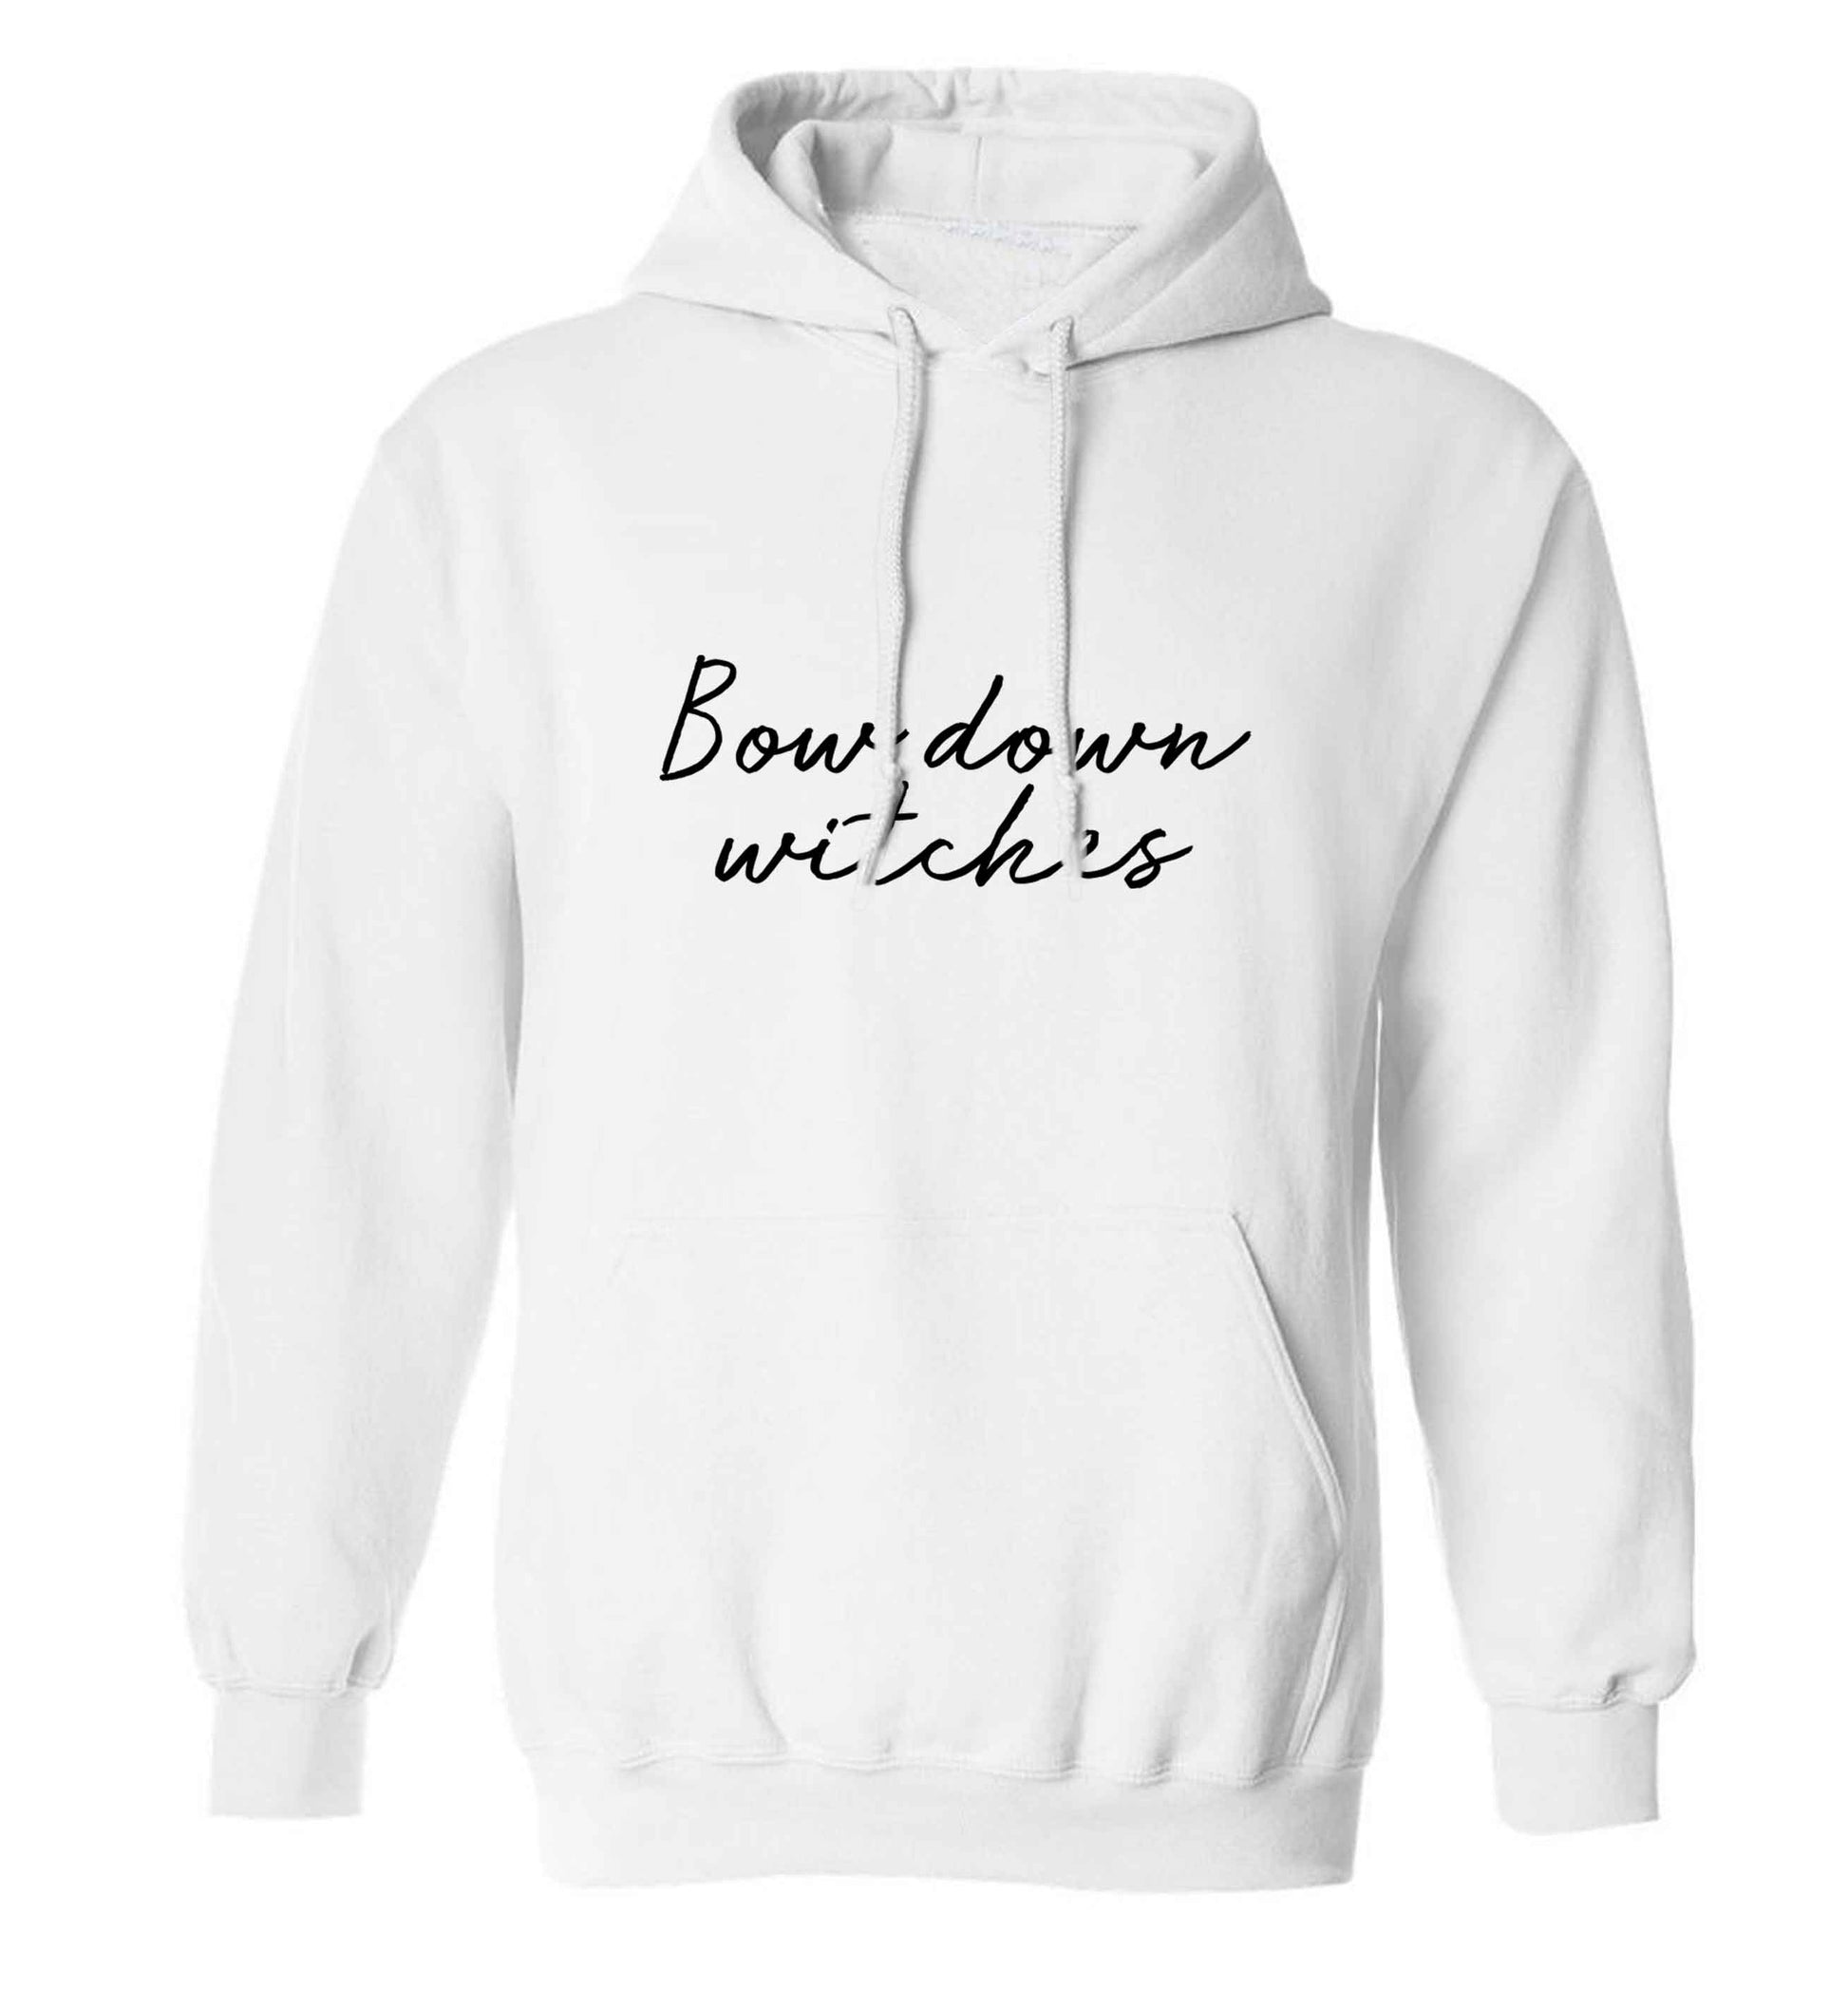 Bow down witches adults unisex white hoodie 2XL